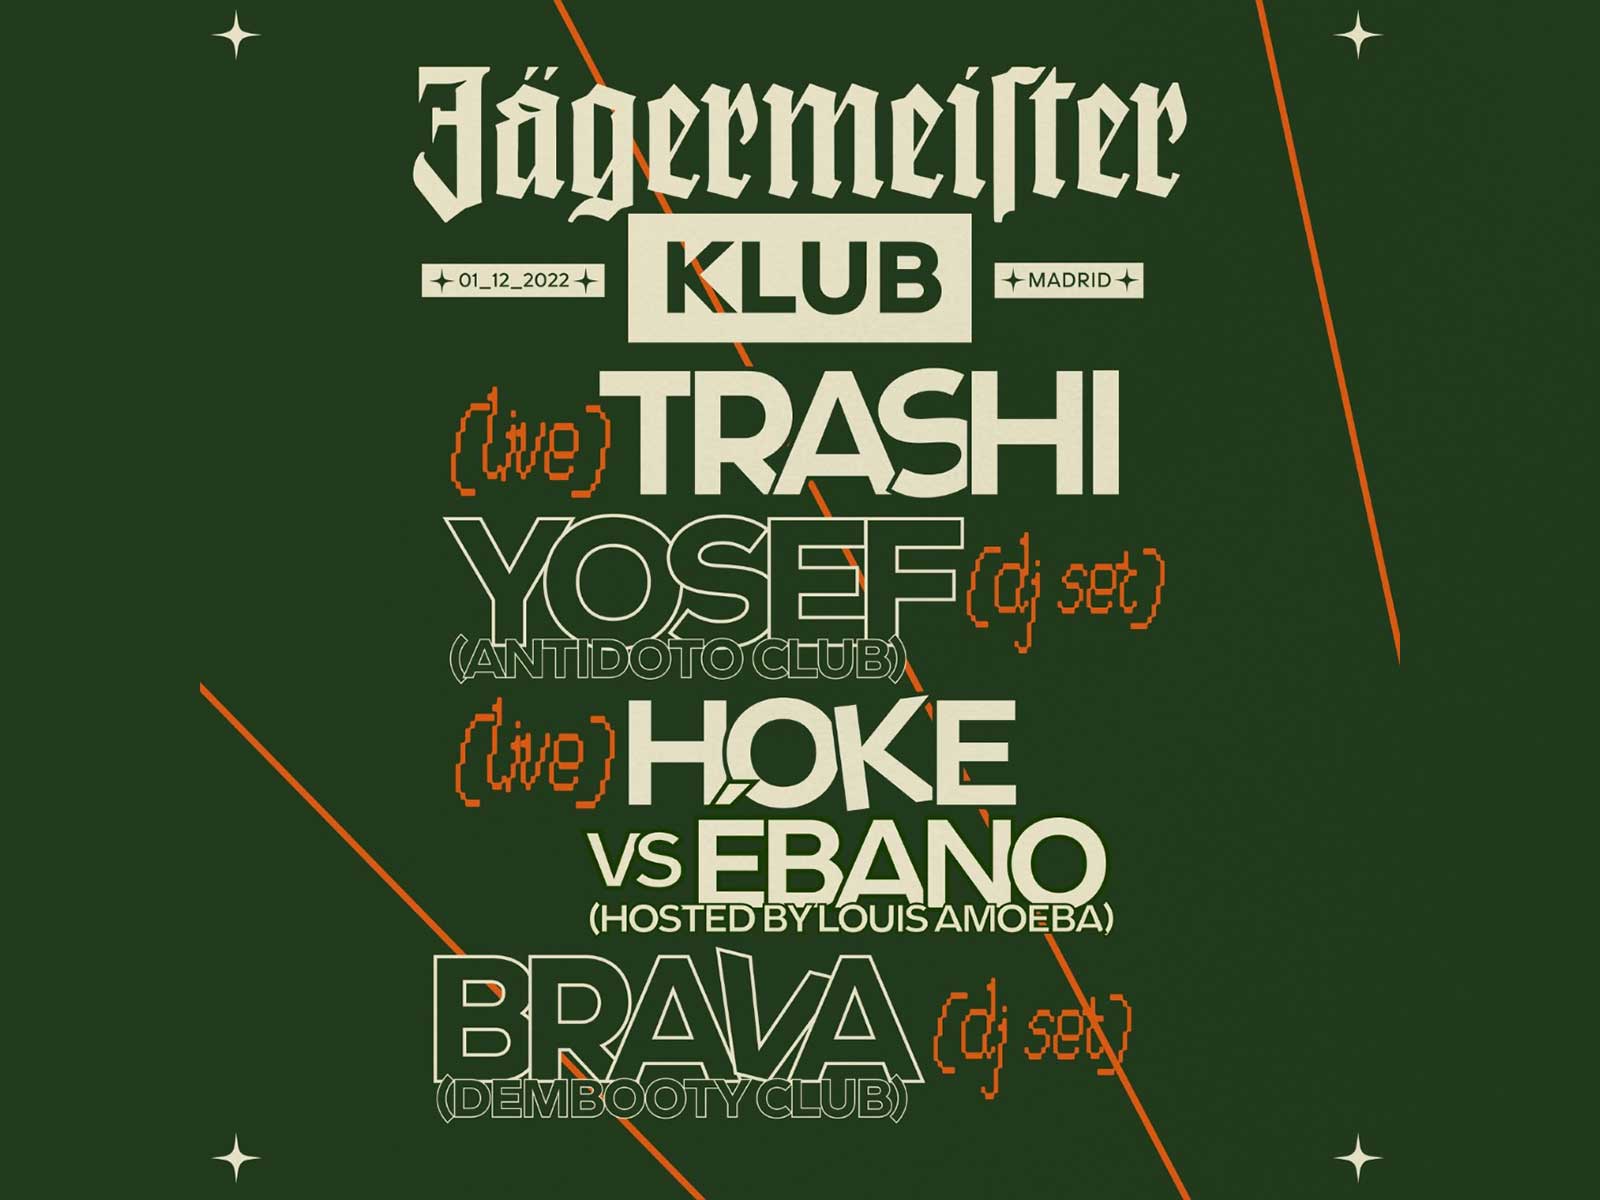 Want to come to Jägermeister Klub, the most awaited music event of the season?